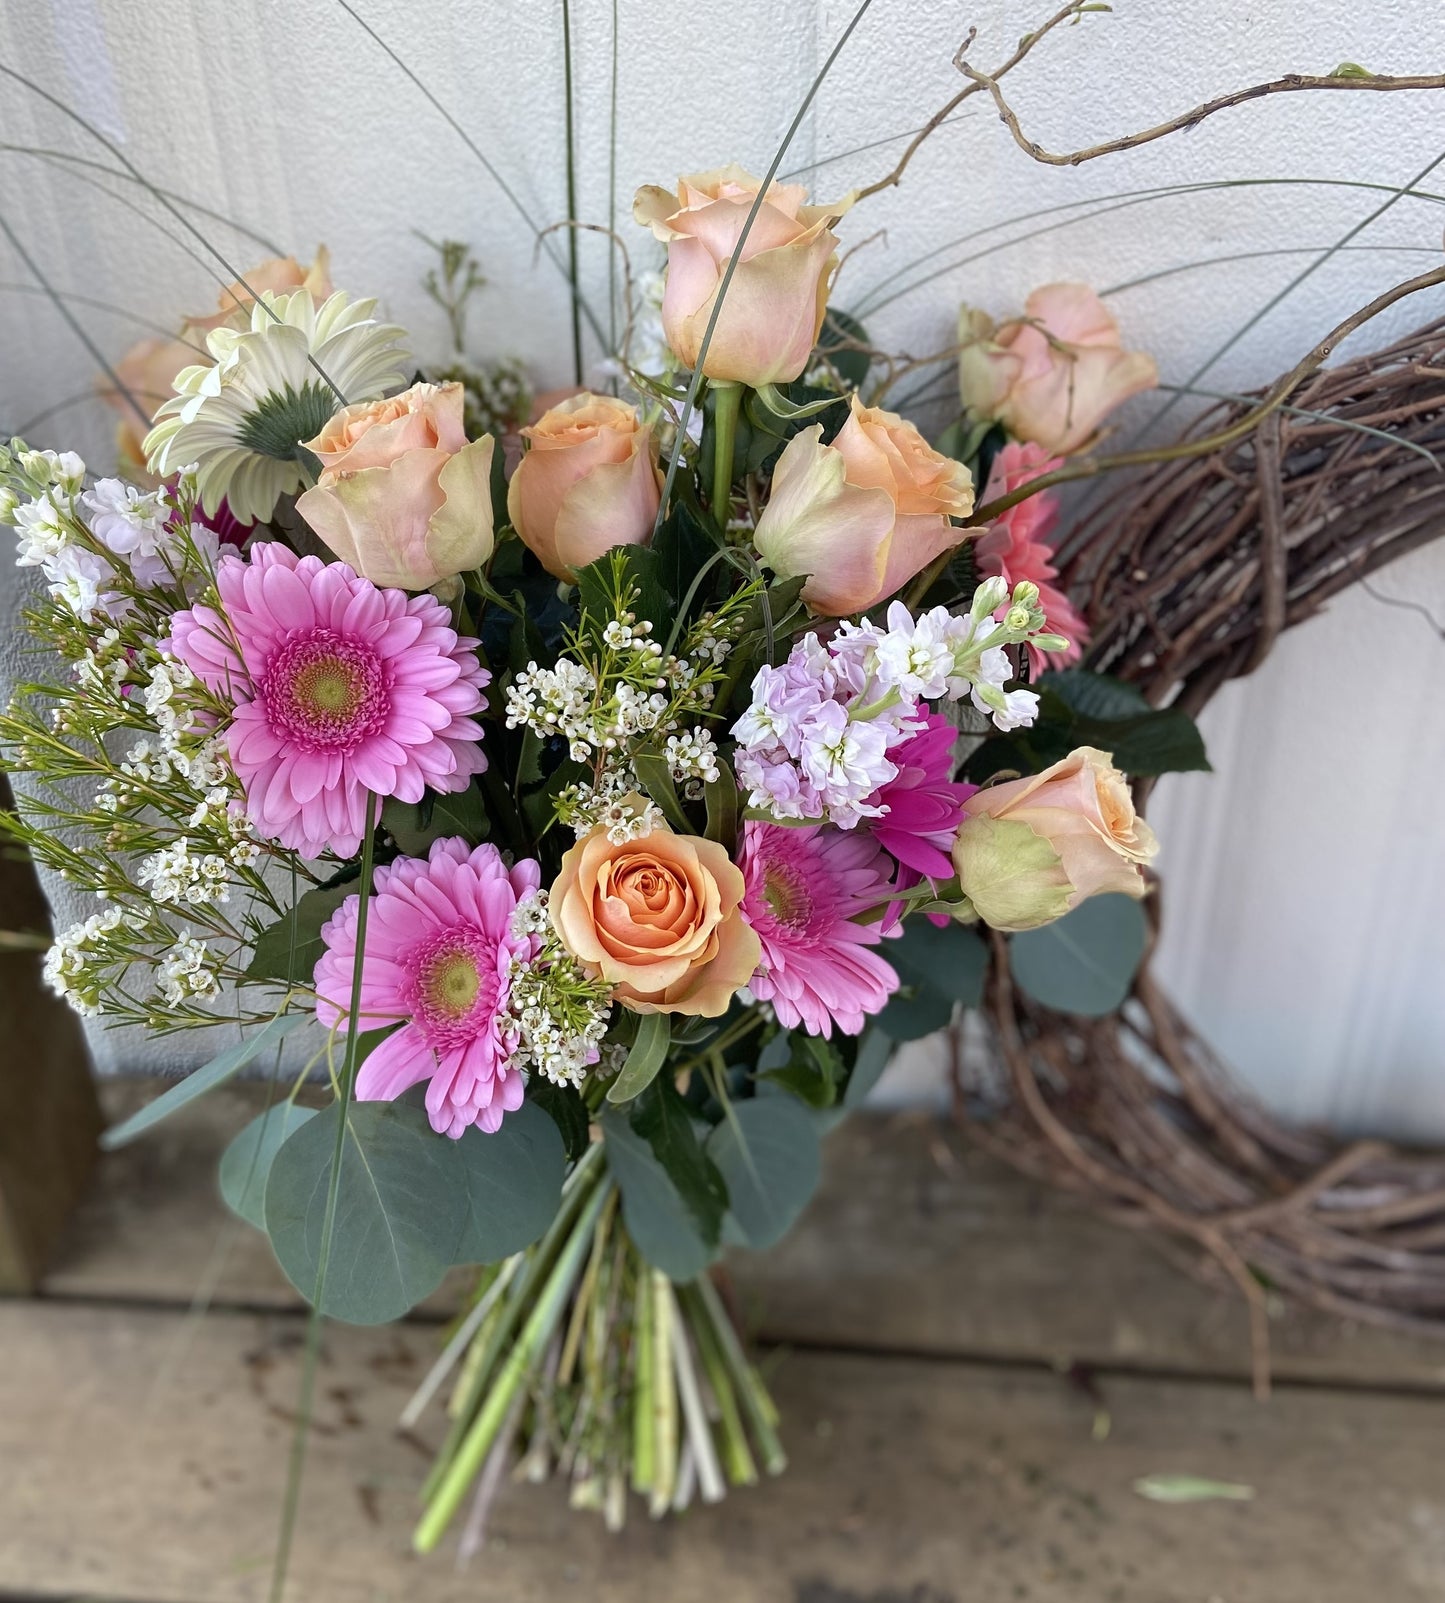 Flower bouquet with different shades of pink flowers. 